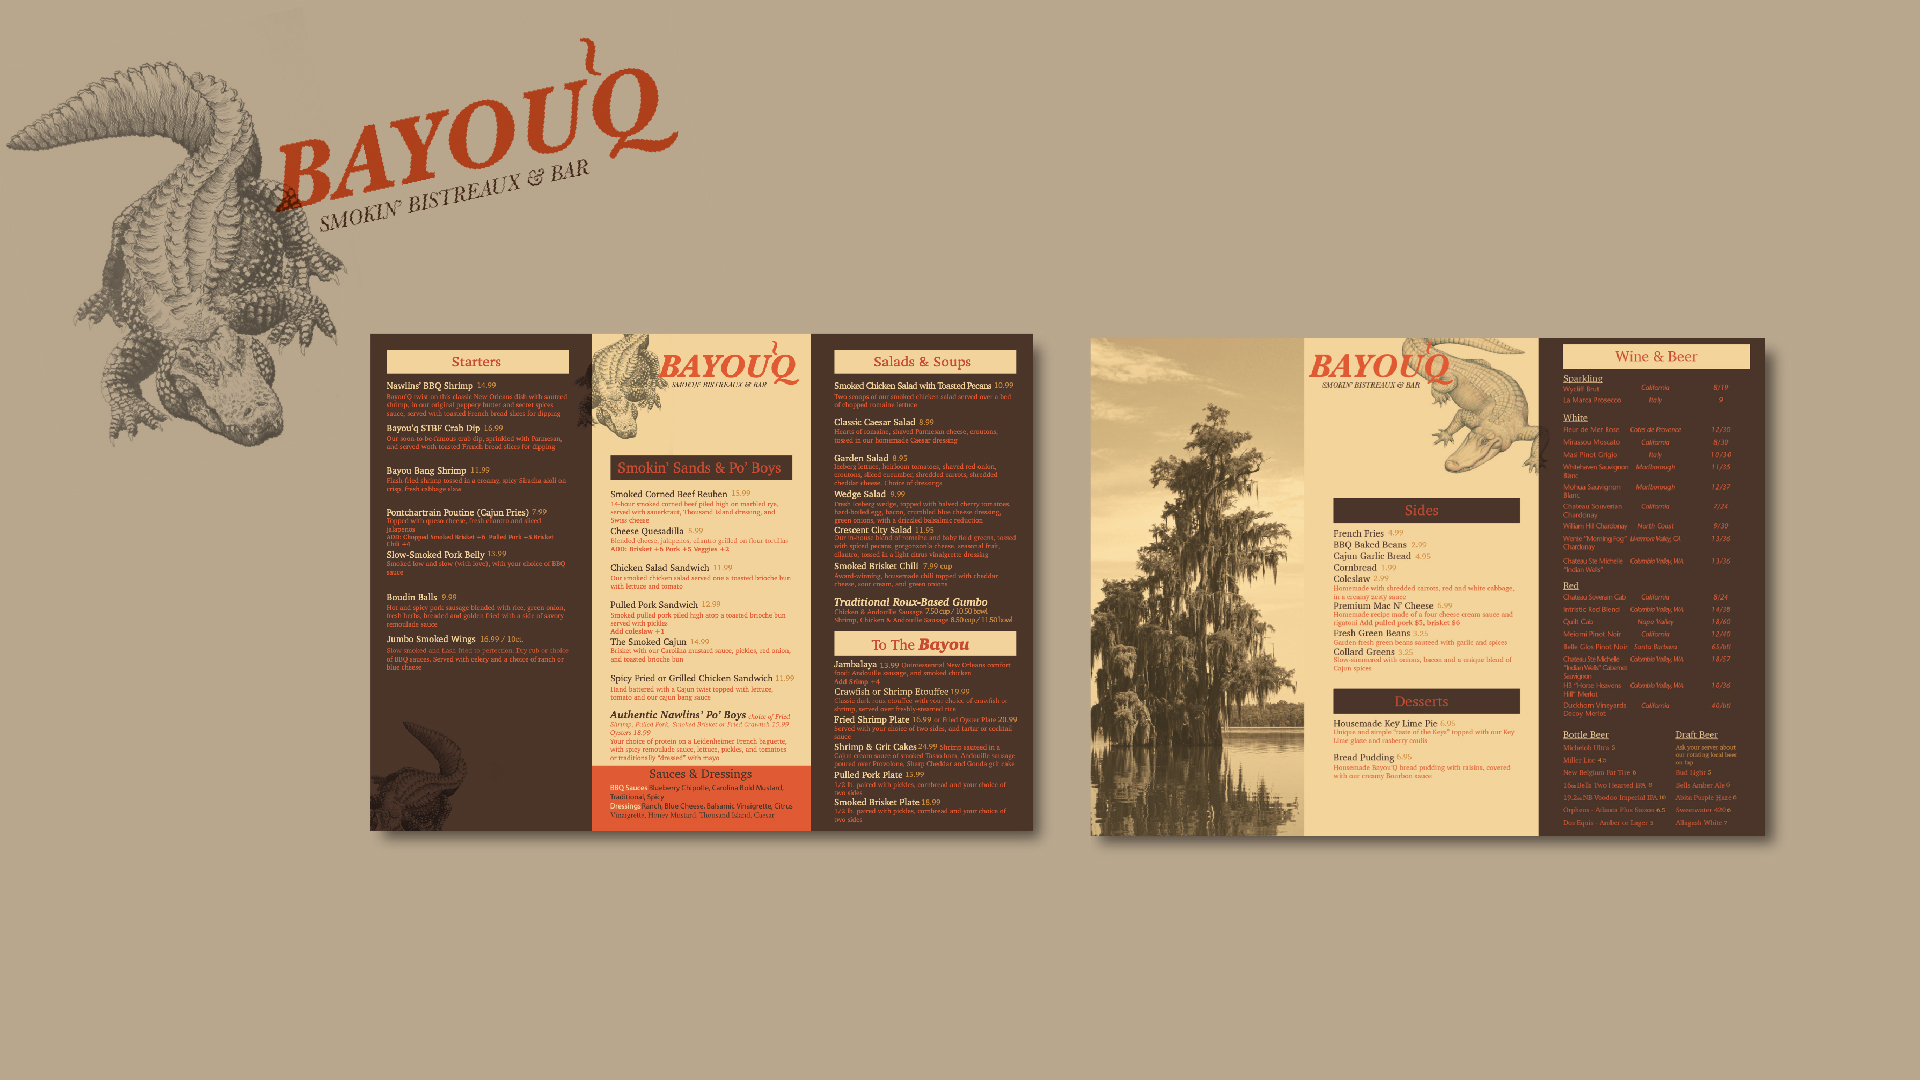 "Bayou," menu redesign / "Bayou," menu redesign, 17 x 11 inches, 2022. This menu redesign gives a warm welcome to the New Orleans cuisine that Bayou‚ offers. 